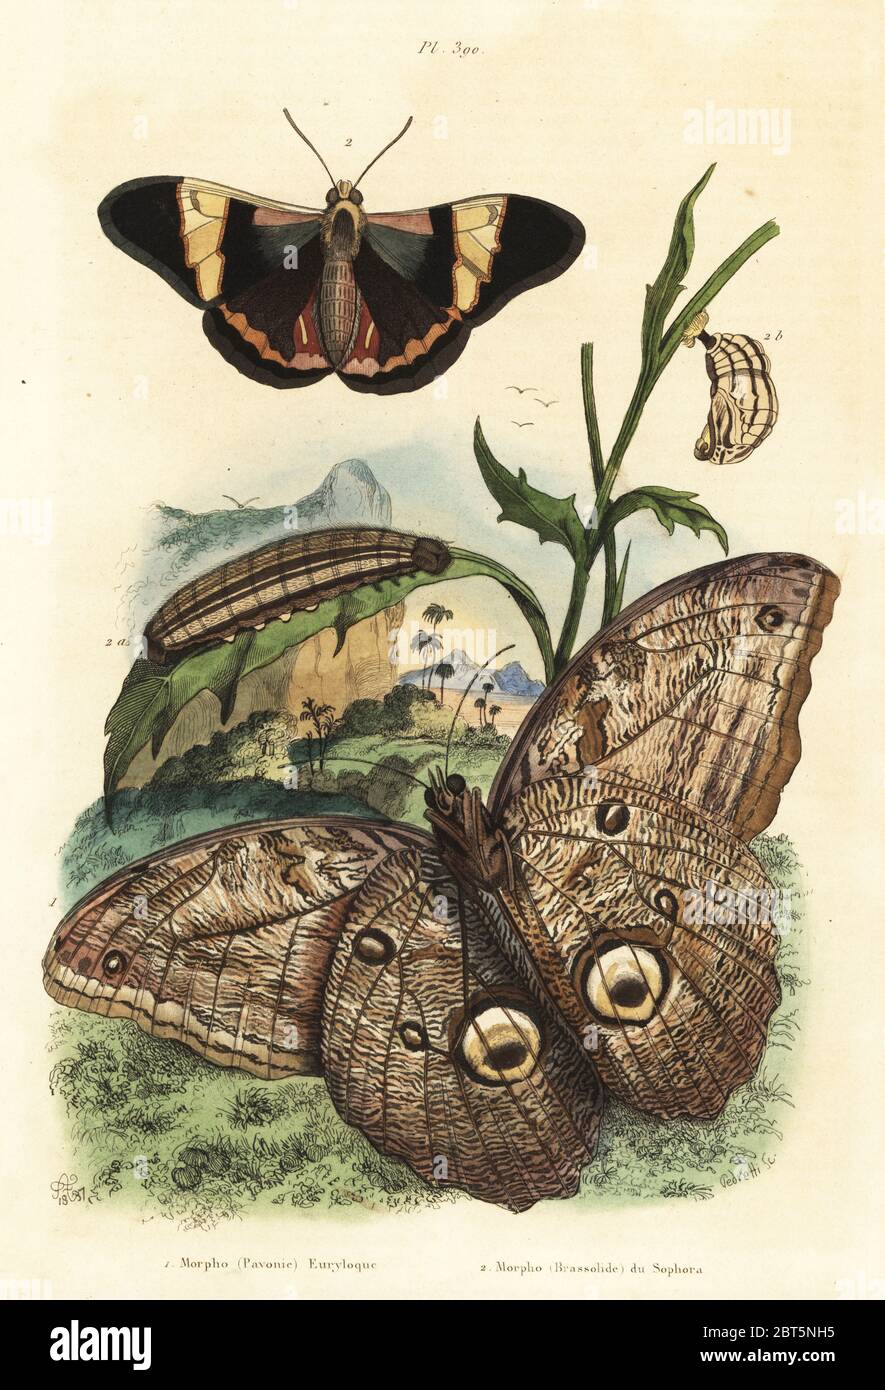 Forest giant owl butterfly, Caligo eurilochus 1 and Brassolis sophorae butterfly, pupa and caterpillar 2. Morpho pavonie euryloque, Morpho brassolide du sophora. Handcoloured steel engraving by Pedretti after an illustration by Adolph Fries from Felix-Edouard Guerin-Meneville's Dictionnaire Pittoresque d'Histoire Naturelle (Picturesque Dictionary of Natural History), Paris, 1834-39. Stock Photo